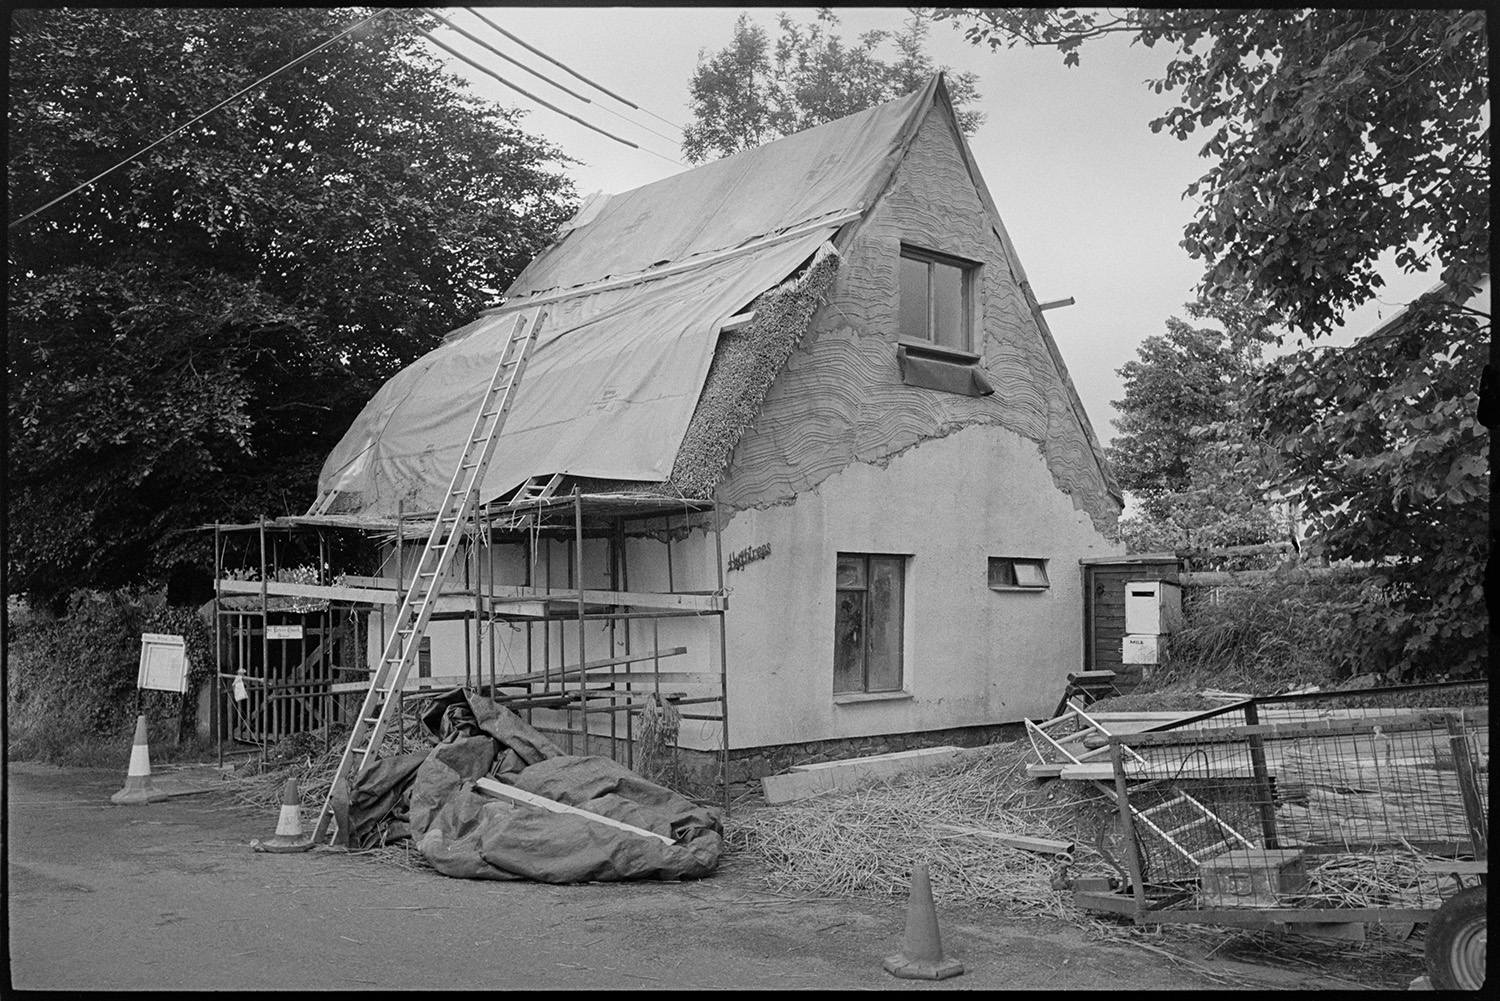 Former thatched stable being converted to housing, see earlier pictures. <br />
[A thatched stable being converted to a residence at Church Gate, Dowland. The thatched roof is covered and scaffolding and a ladder are erected against one wall.] 